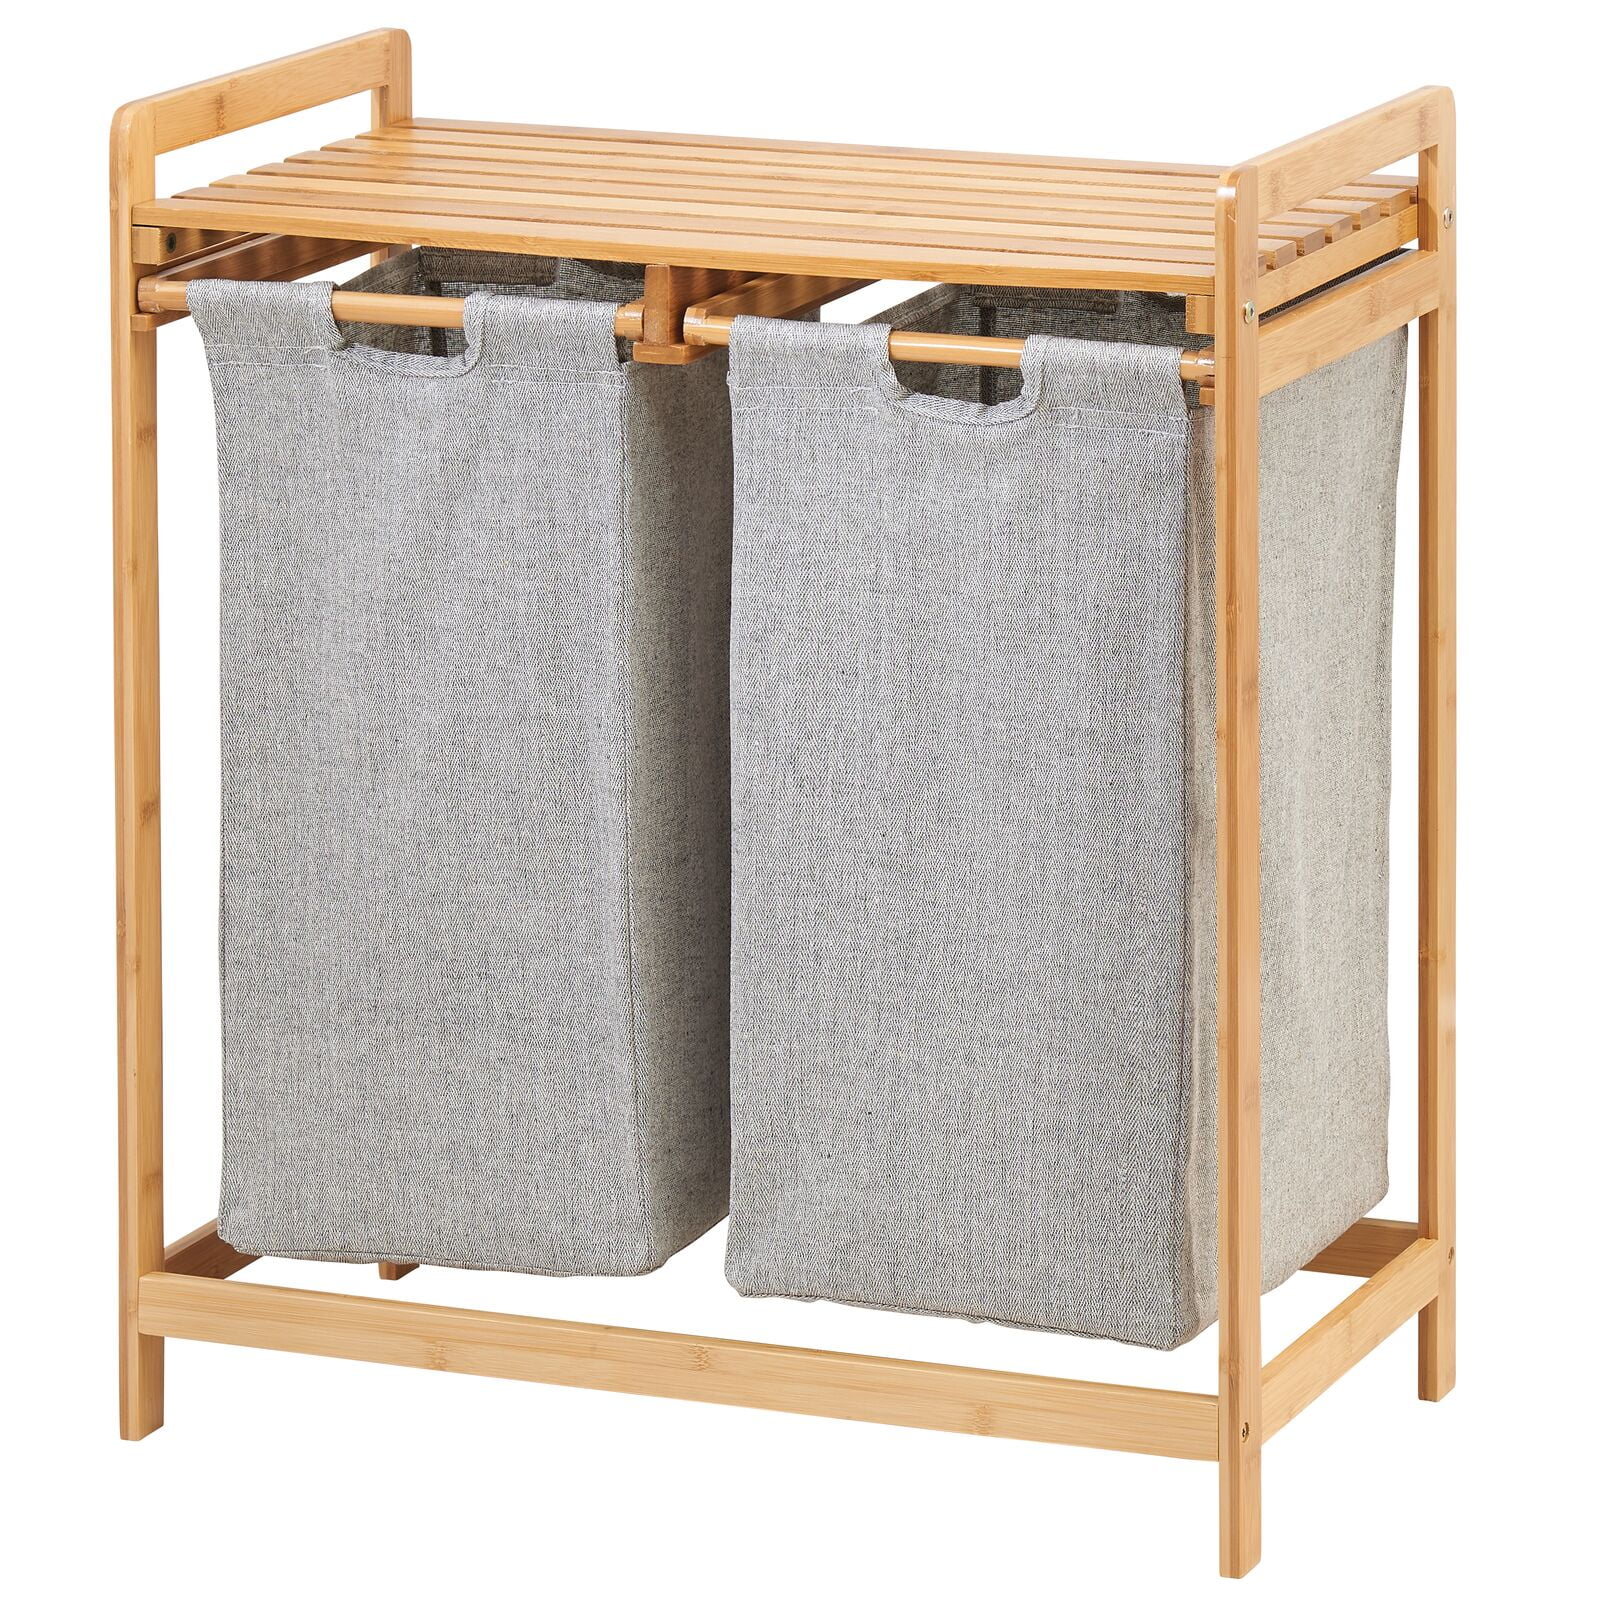 Two-Section L Details about   ToiletTree Products Bamboo Laundry Hamper with Dual Compartments 